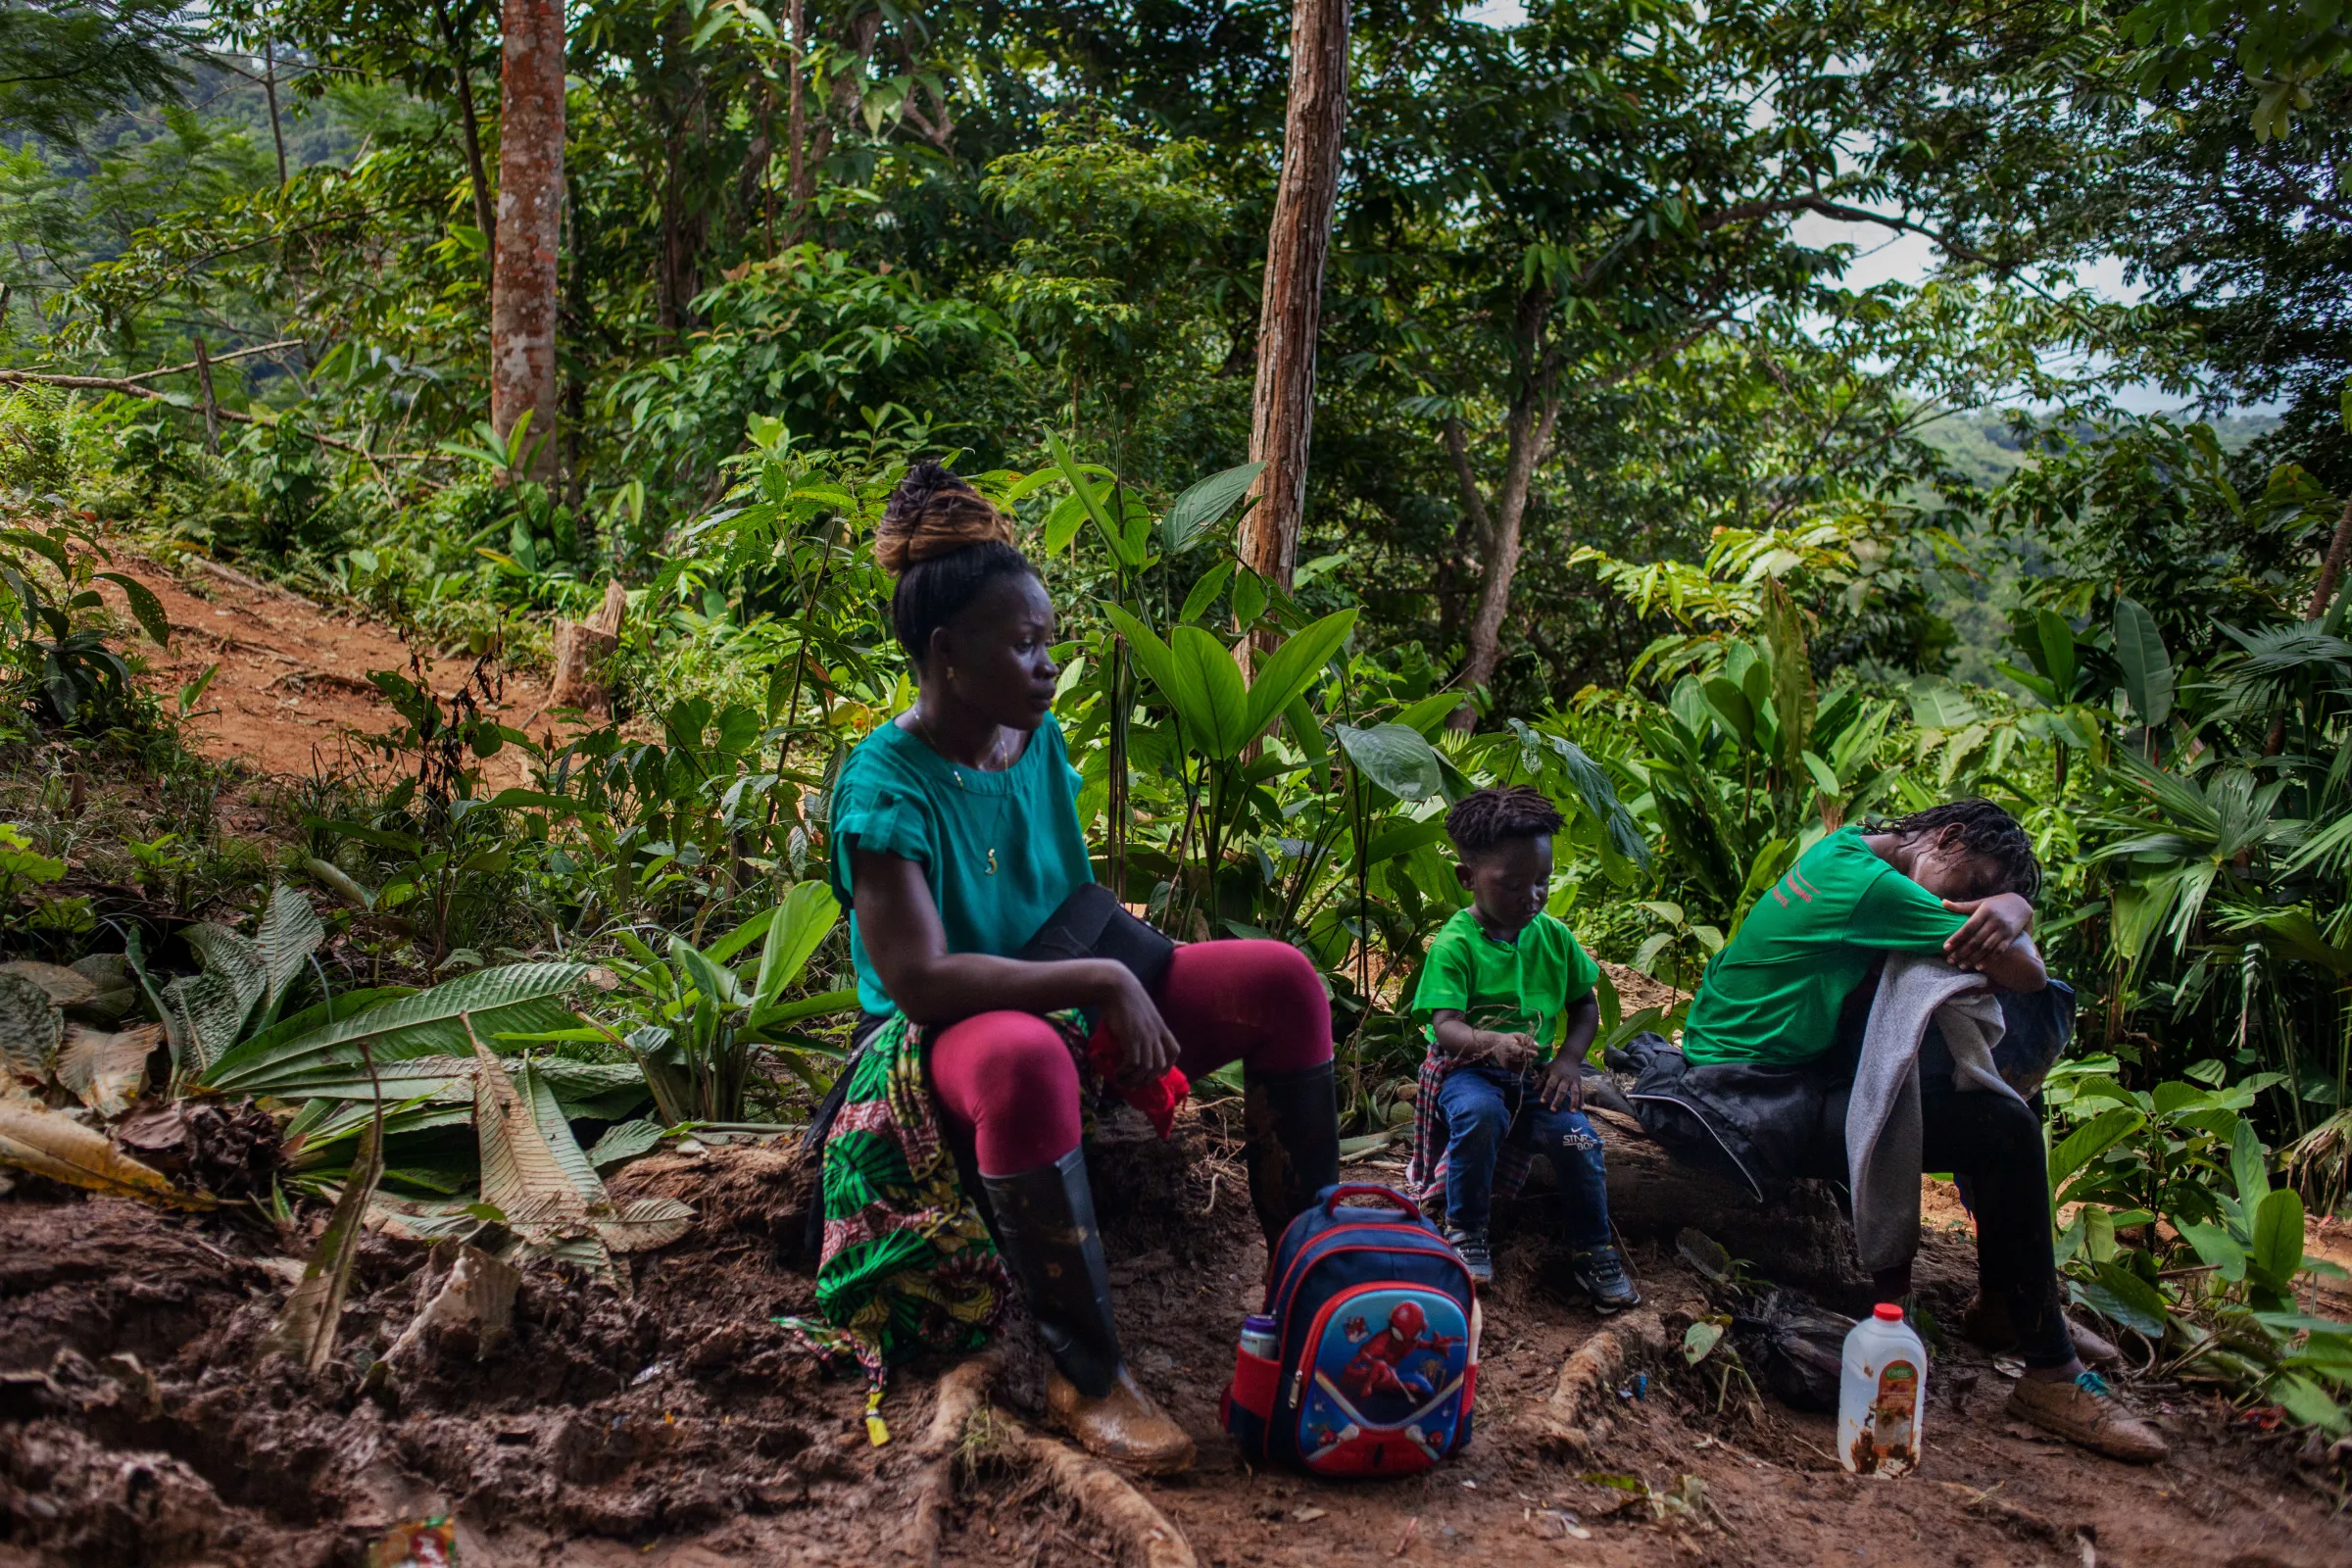 A migrant from Sierra Leone rests with her children during an exhausting trek through the Darién Gap, Colombia, July 27, 2022. Thomson Reuters Foundation/Fabio Cuttica